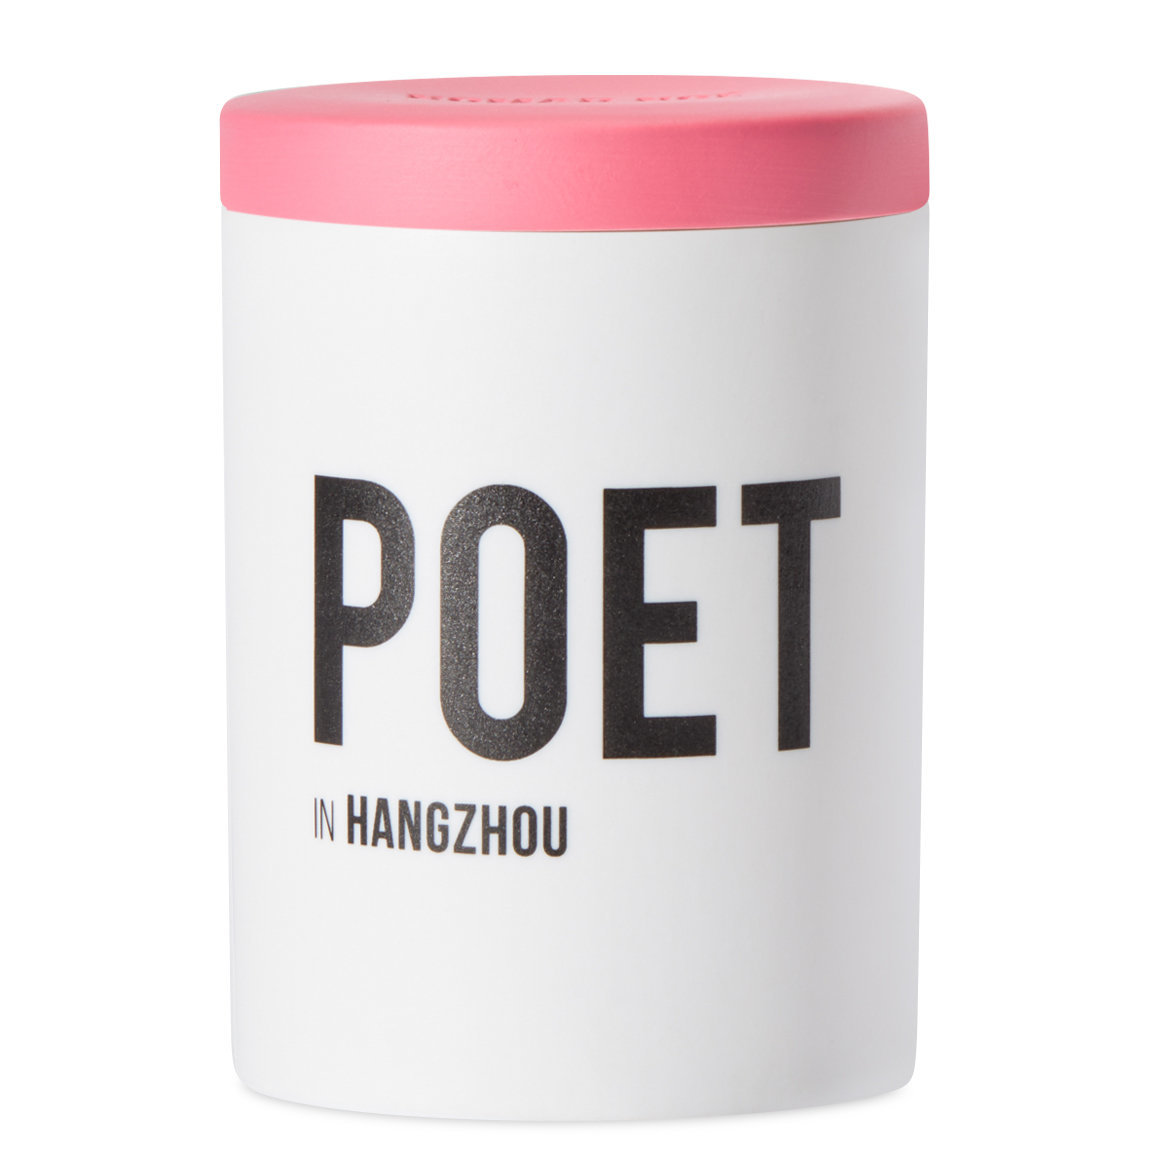 Nomad Noé Poet In Hangzhou - Bamboo & Tuberose Candle alternative view 1.